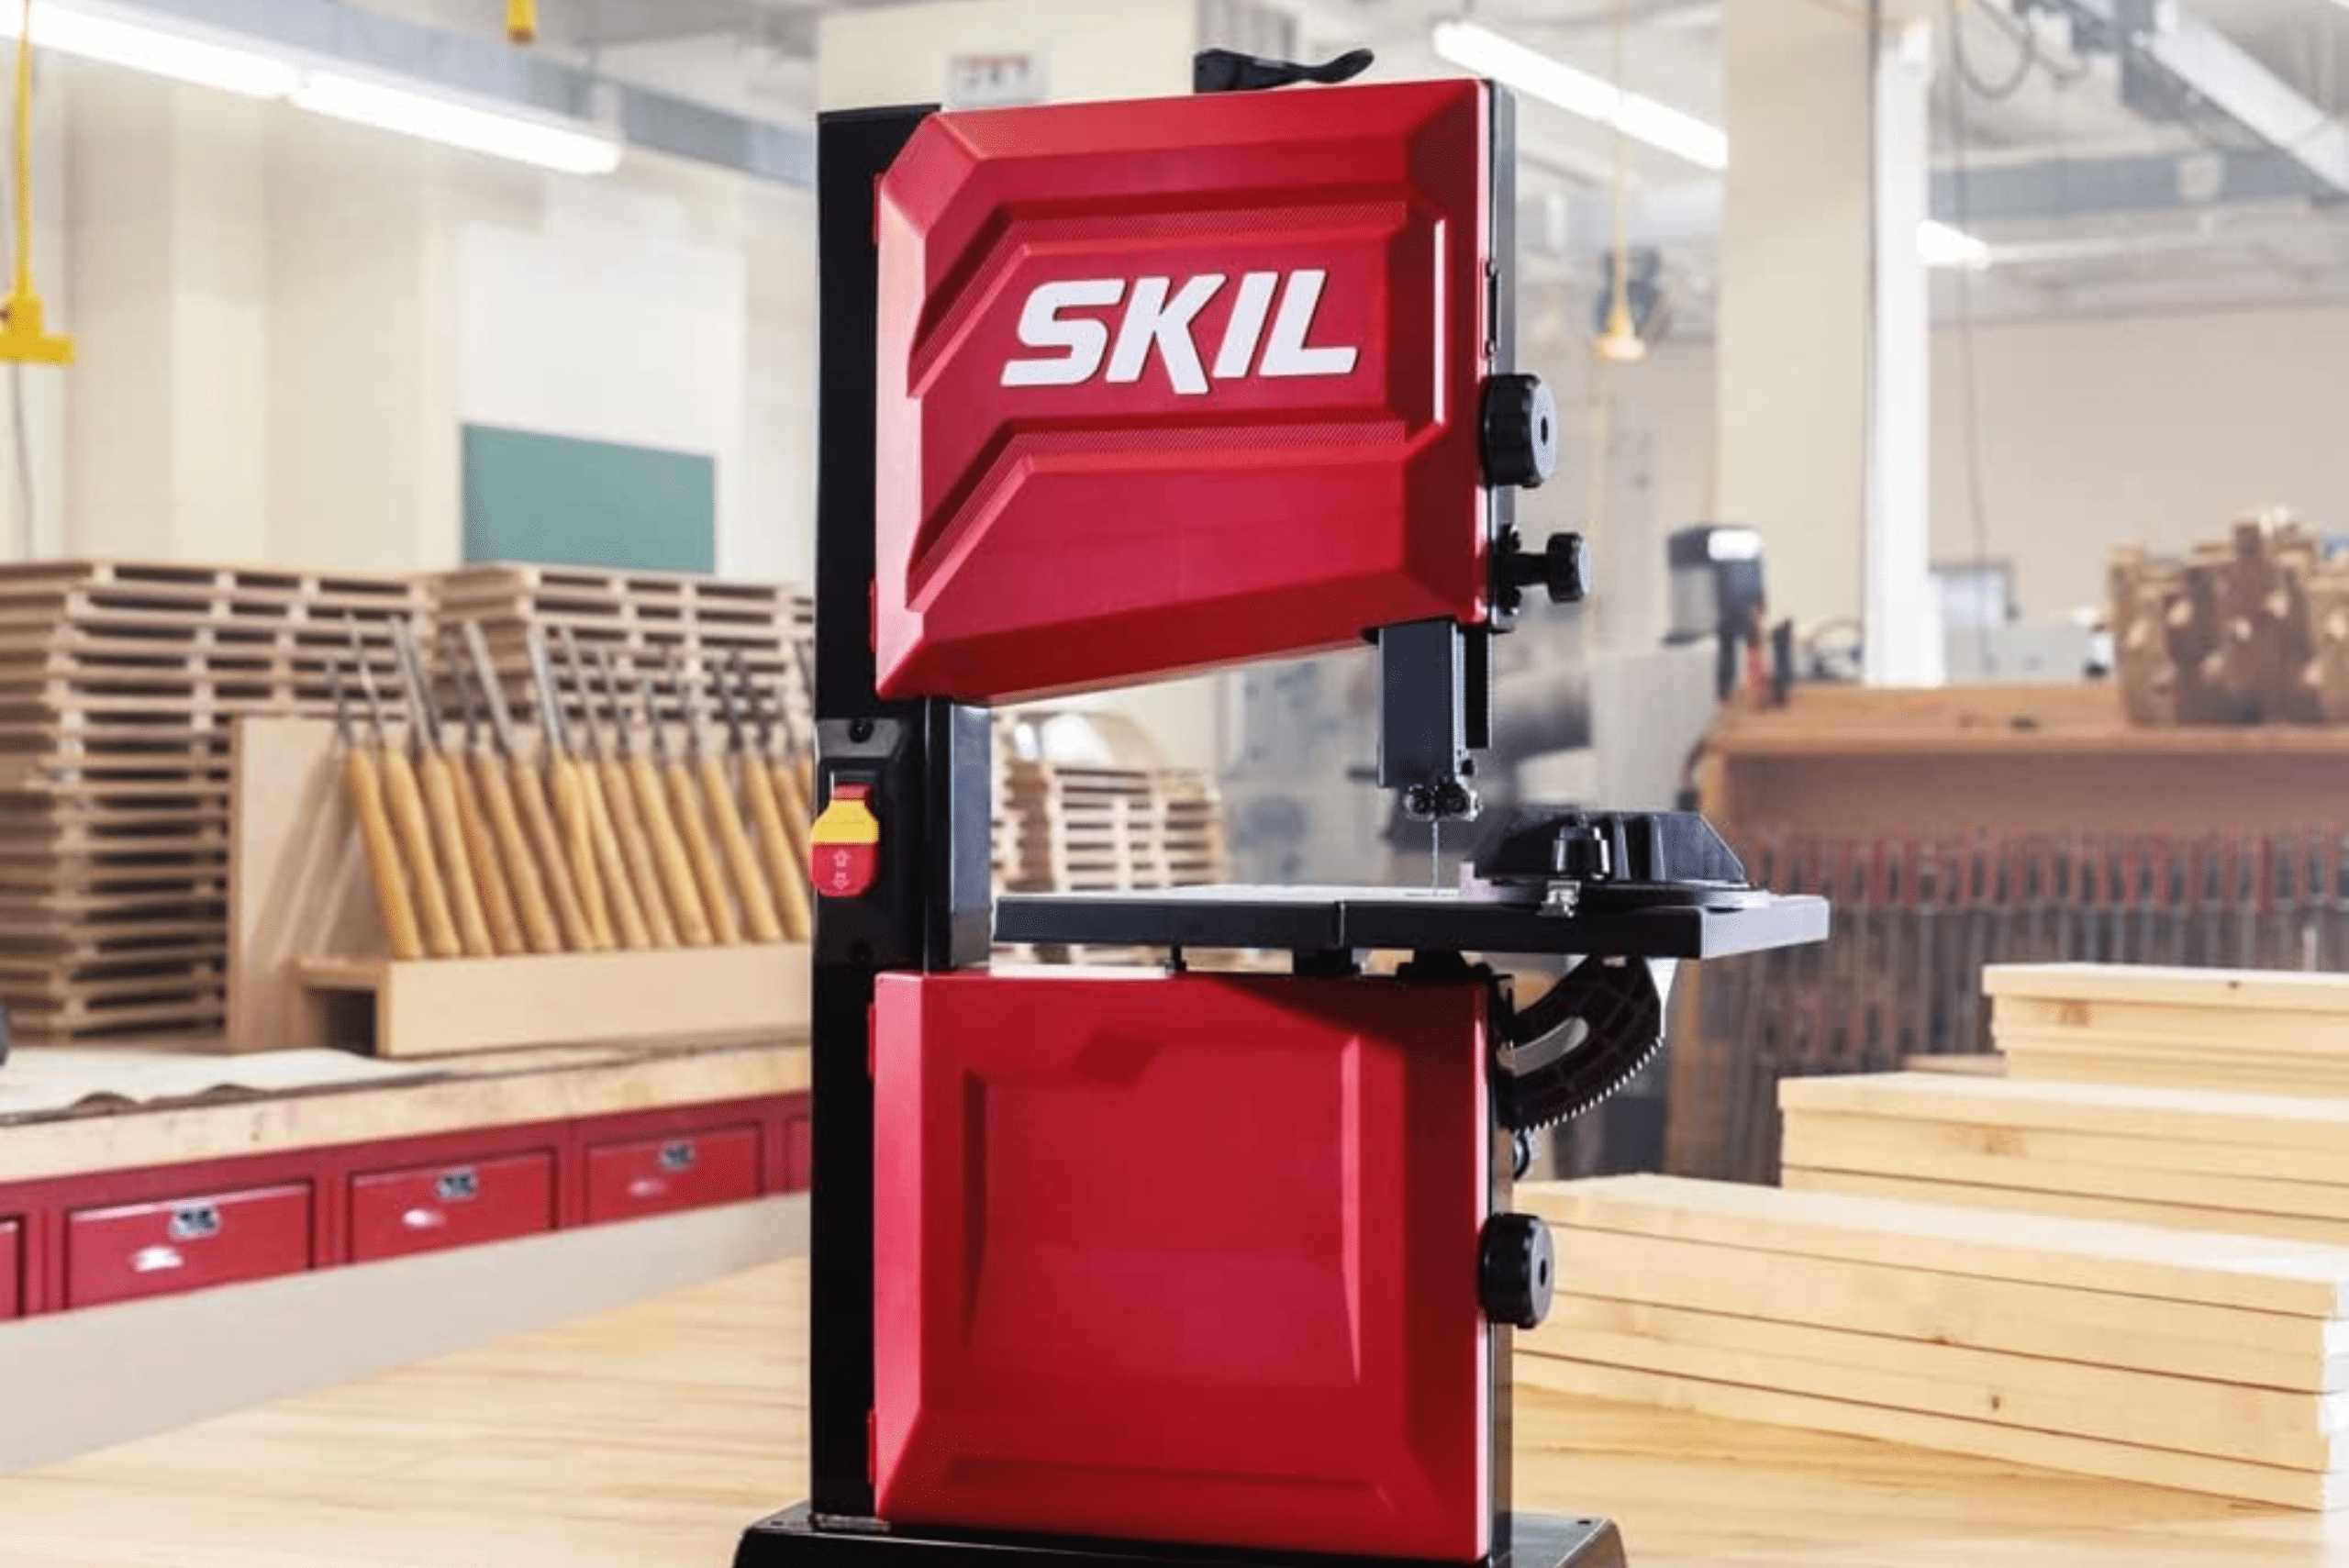 Product picture of a band saw.